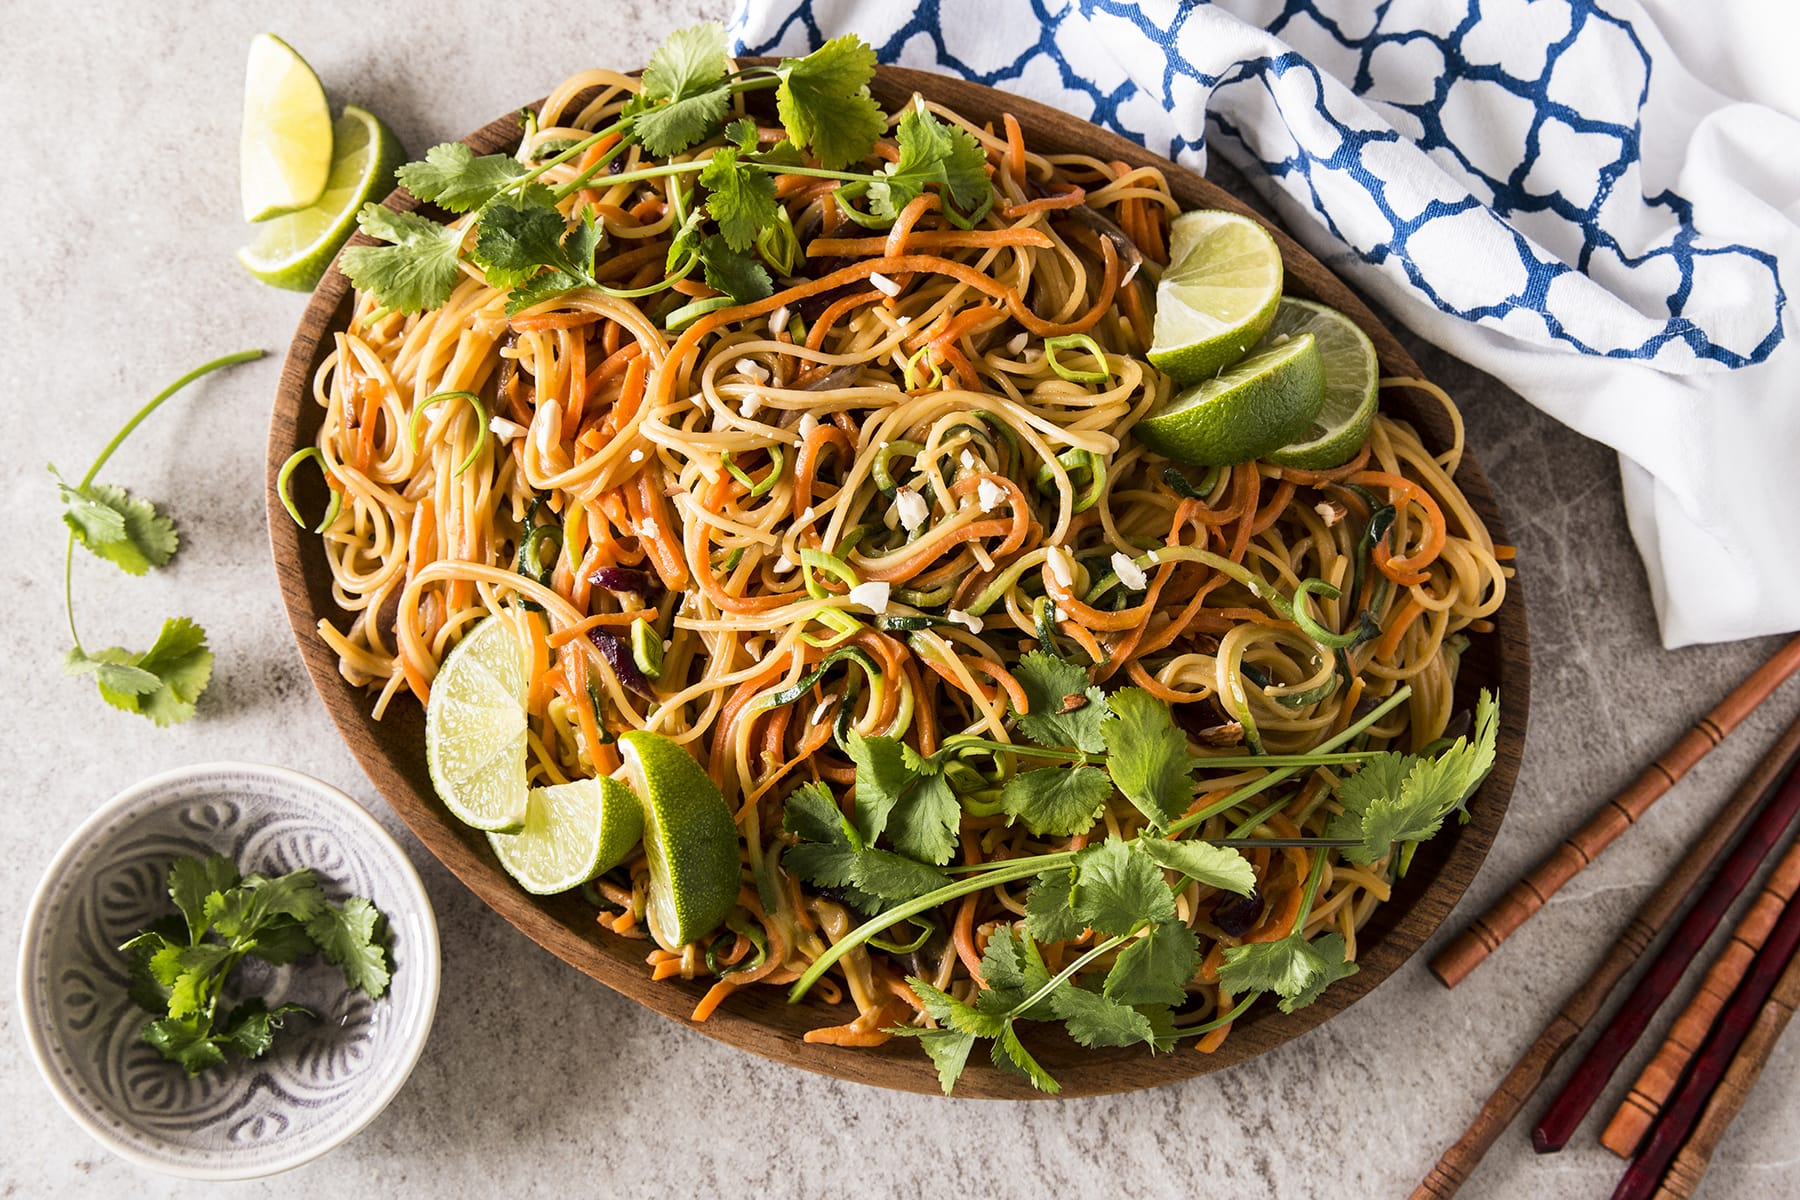 Thai Peanut Noodles with Spiralized Vegetables Recipe - Food Fanatic